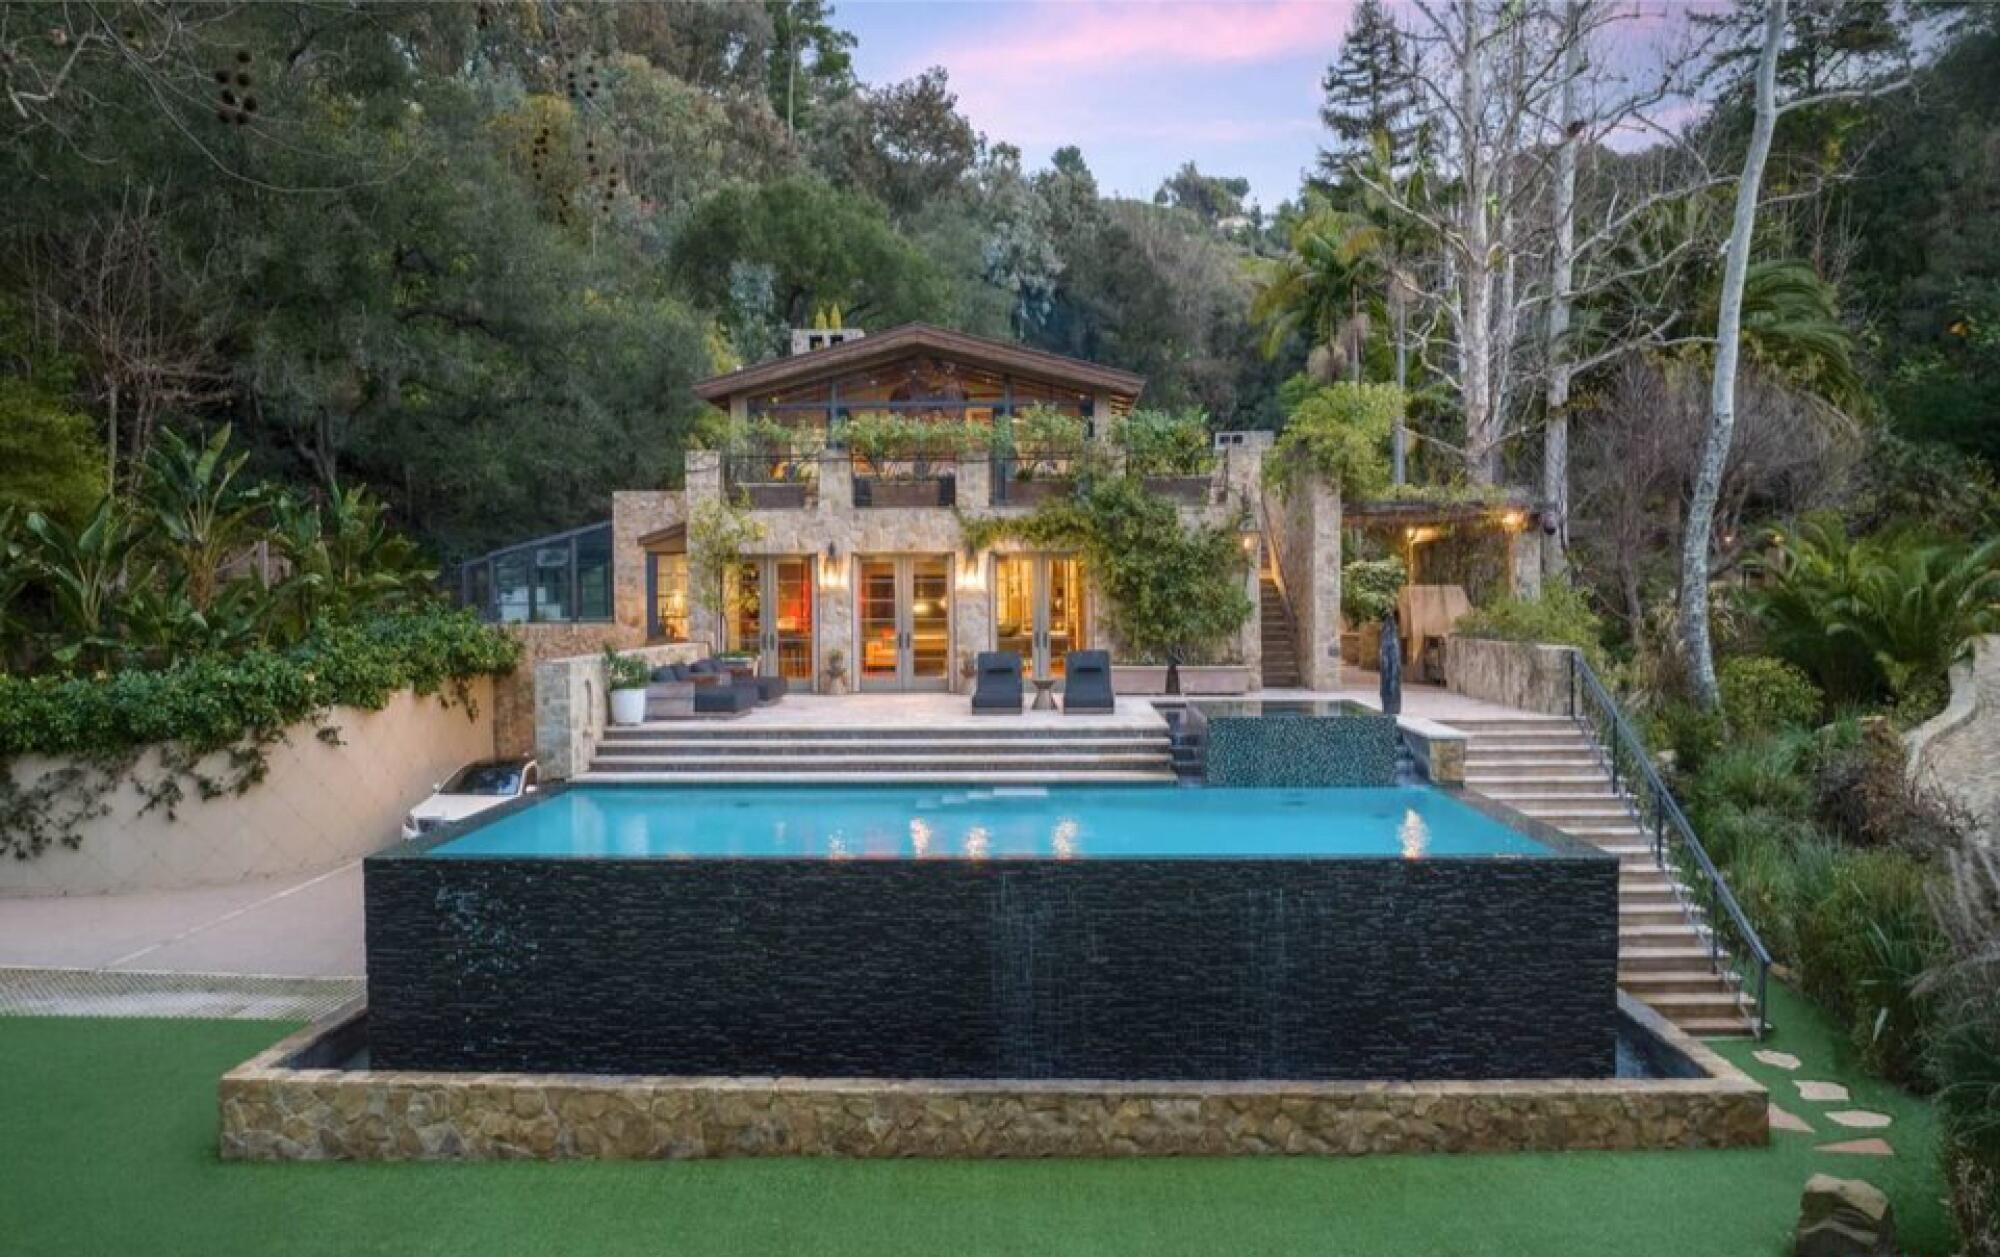 Jennifer Lopez listed her Bel-Air home for $42.5 million in February.